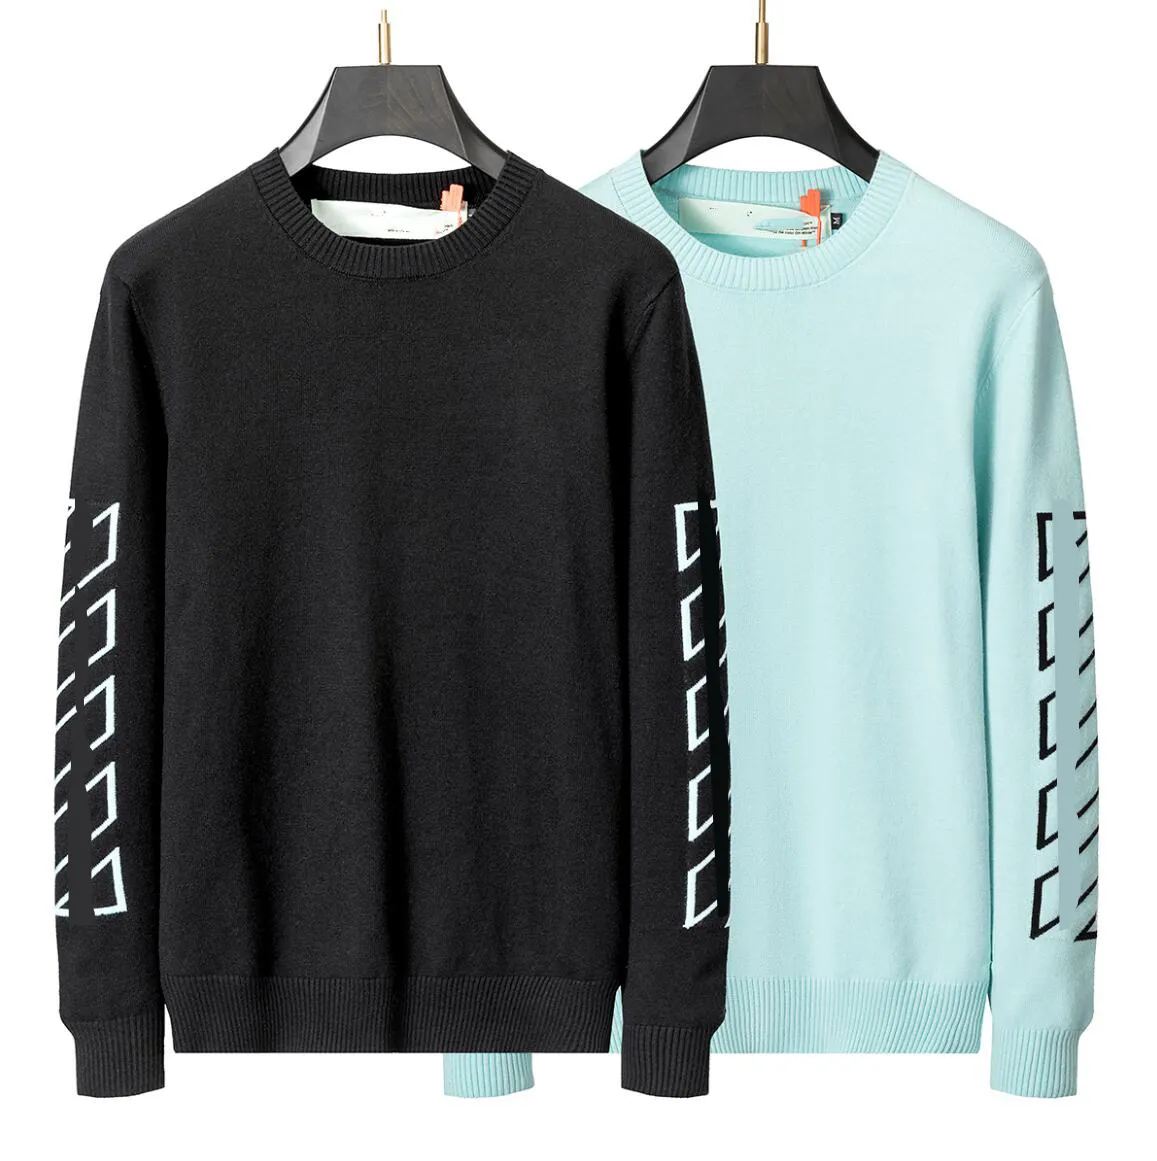 Designers Sweaters Luxury Casual Slim Fit Streetwear Mens Womens Geometric Embroidered Printing Fashion Tops Quality